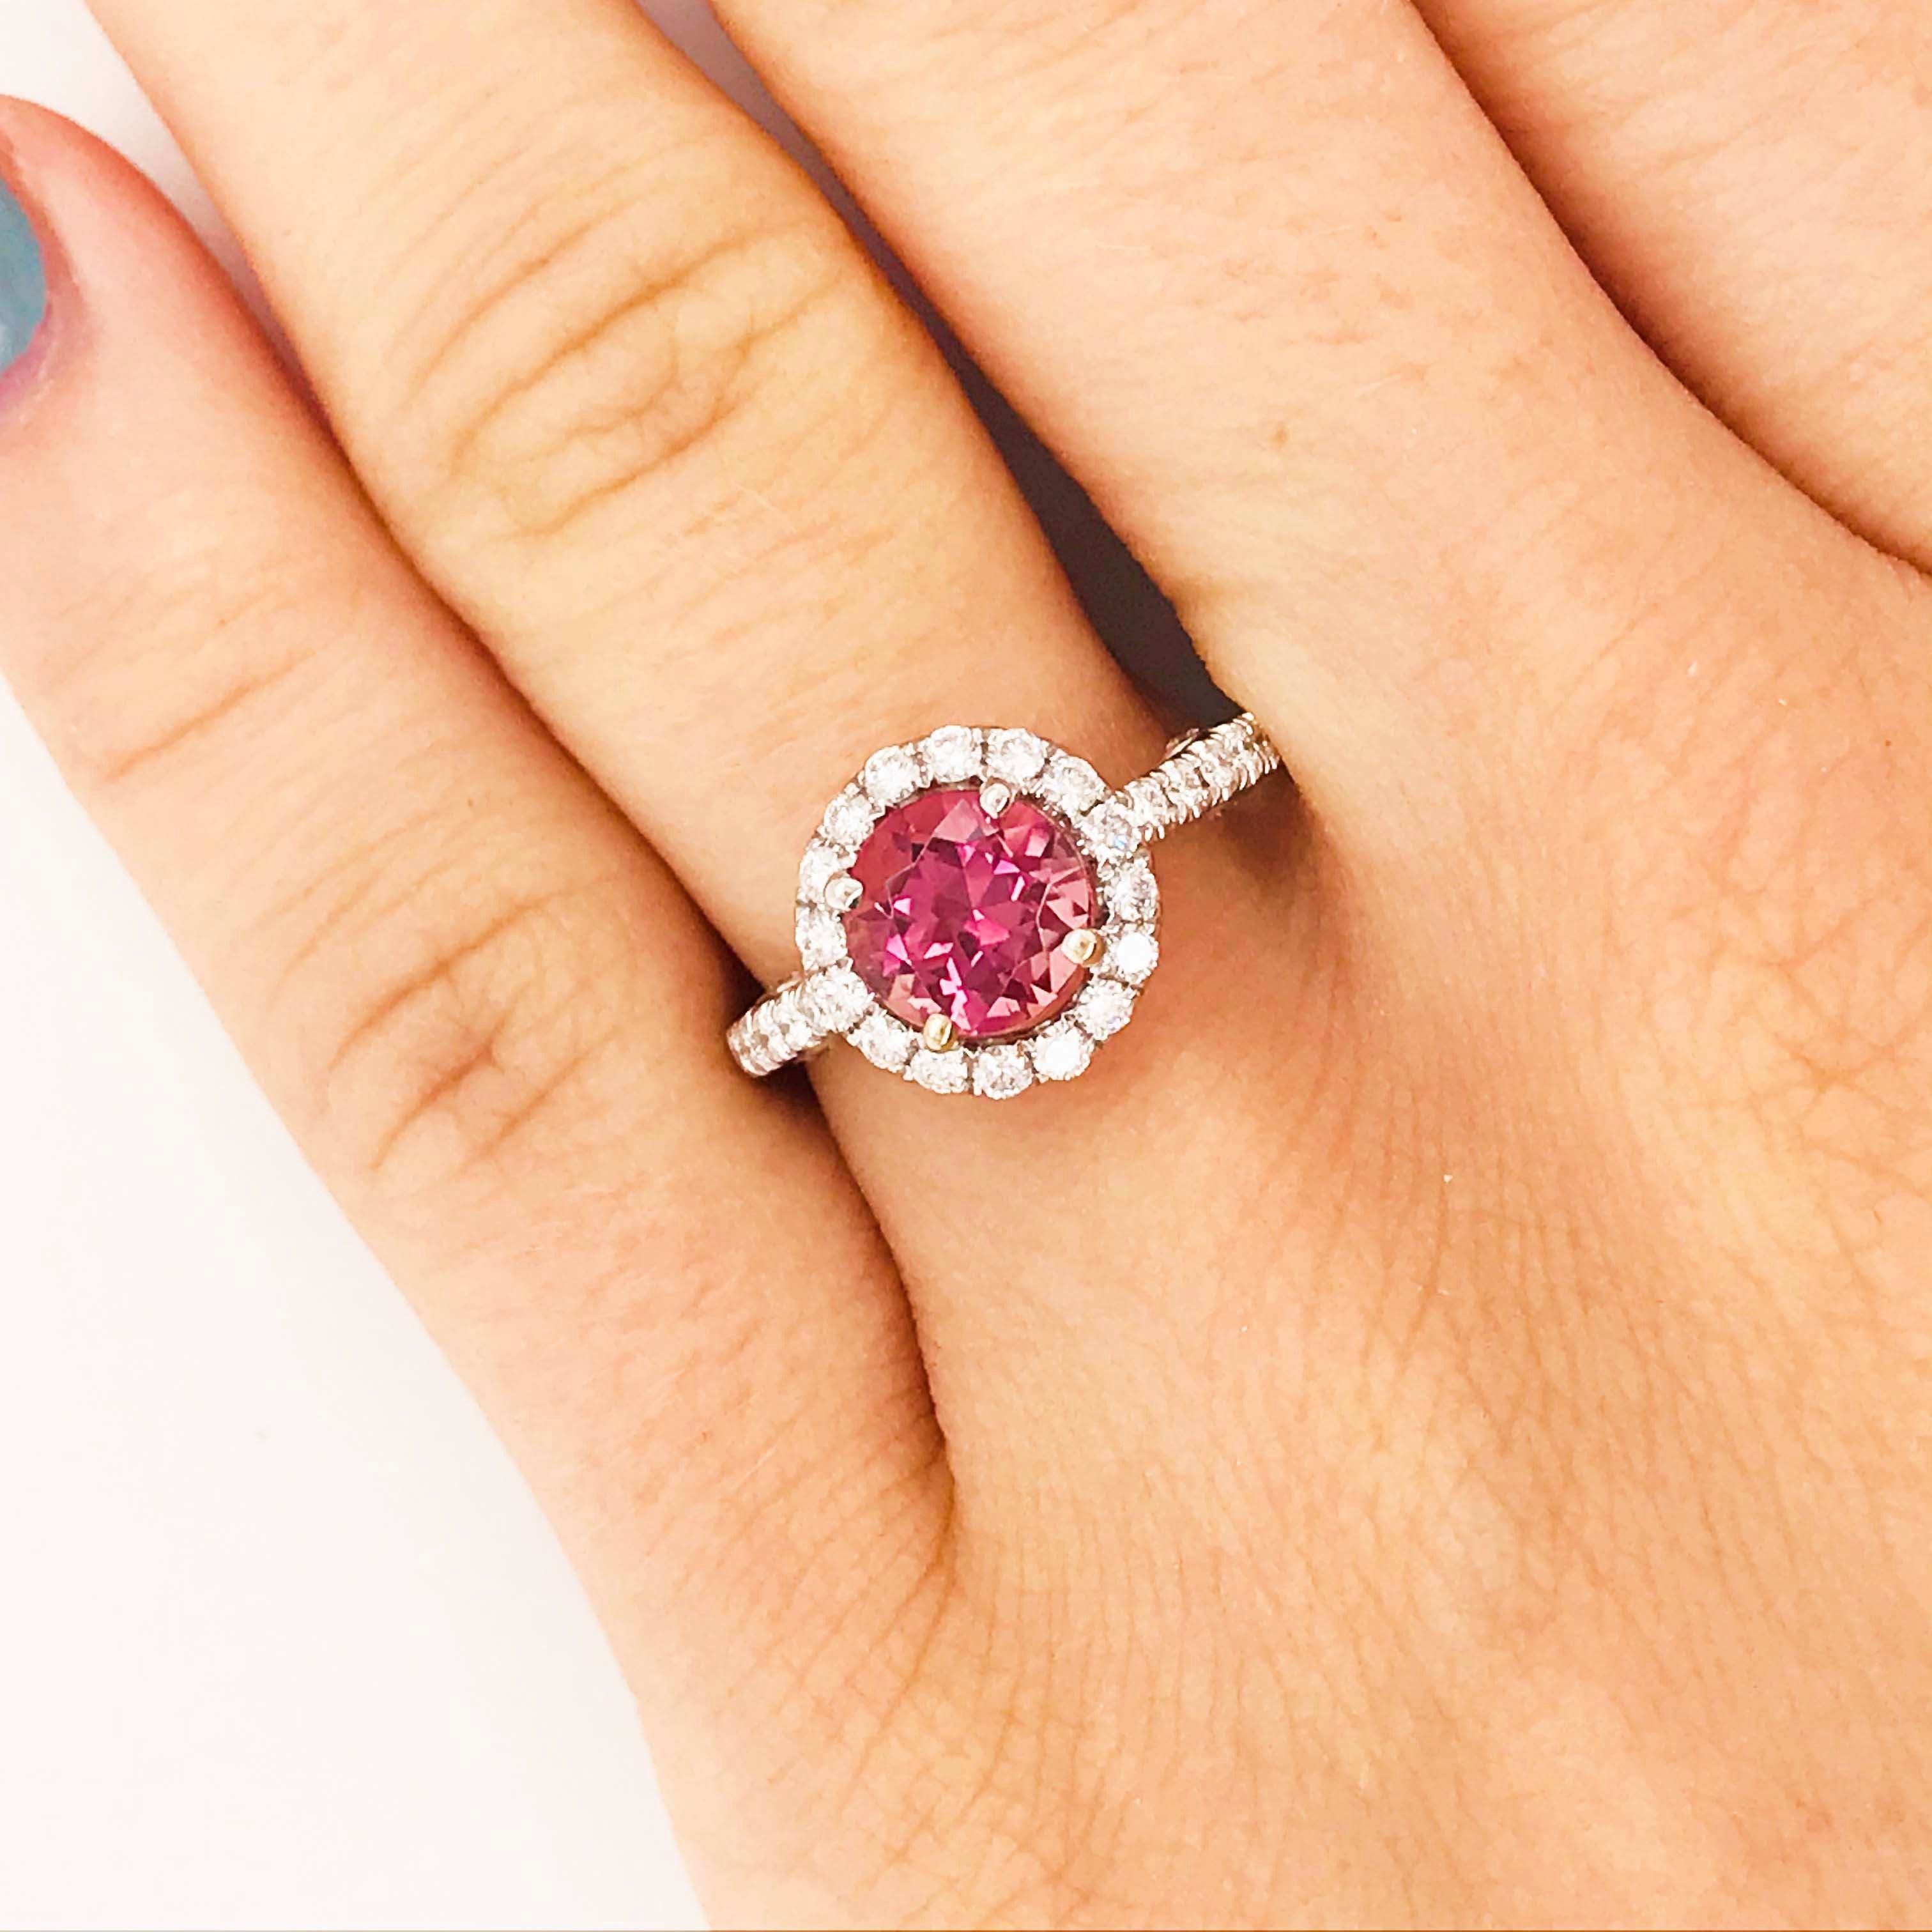 For Sale:  Pink Tourmaline and Diamond Ring, White Gold 2 Carat Diamond and Gem Engagement 3